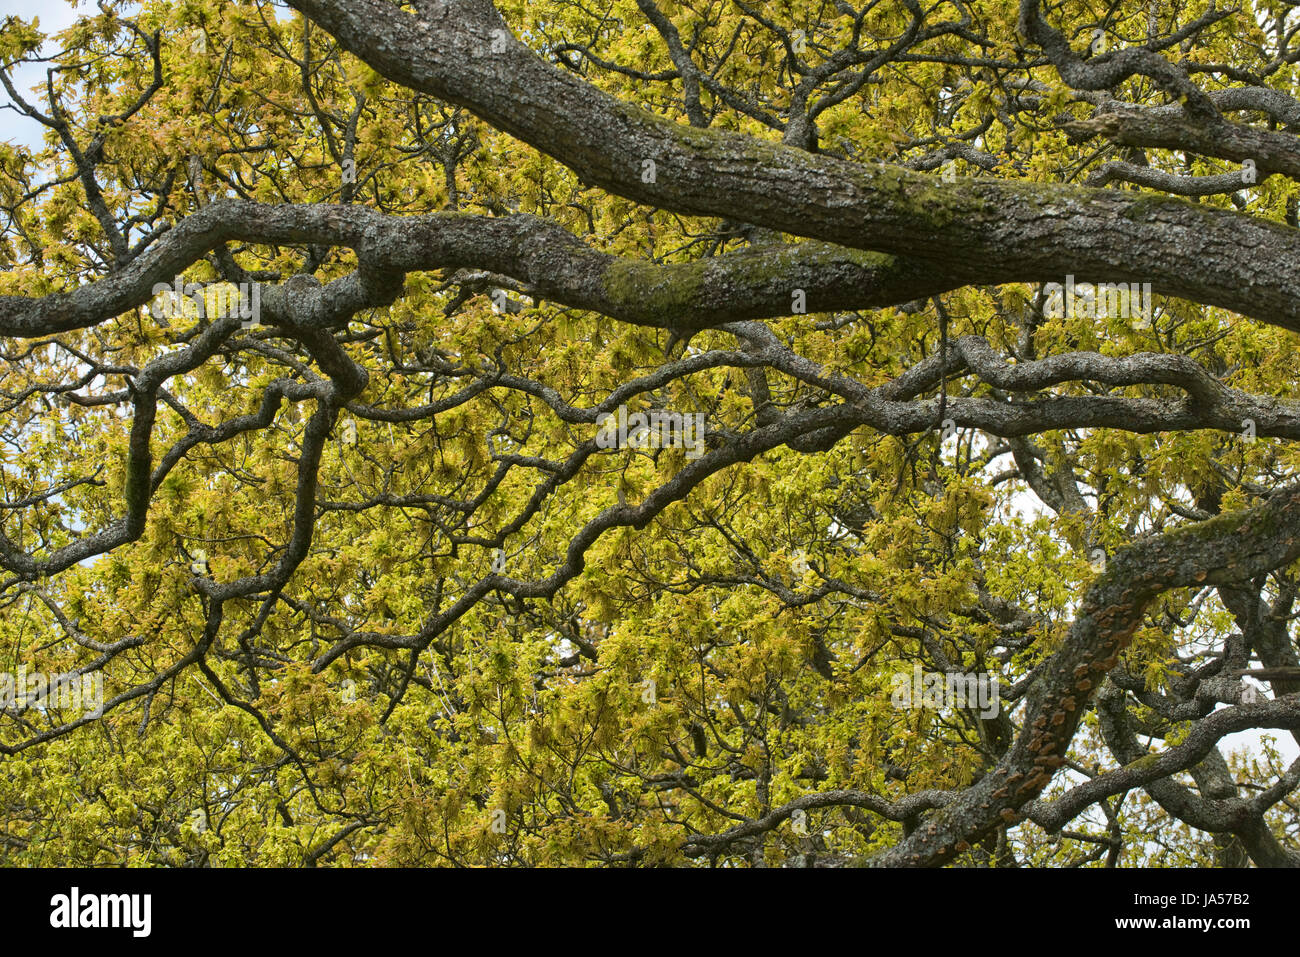 Dramatic dark branches of an oak tree, Quercus robur, silhouetted against fresh light green leaves and flowers in springtime, Berkshire, May Stock Photo